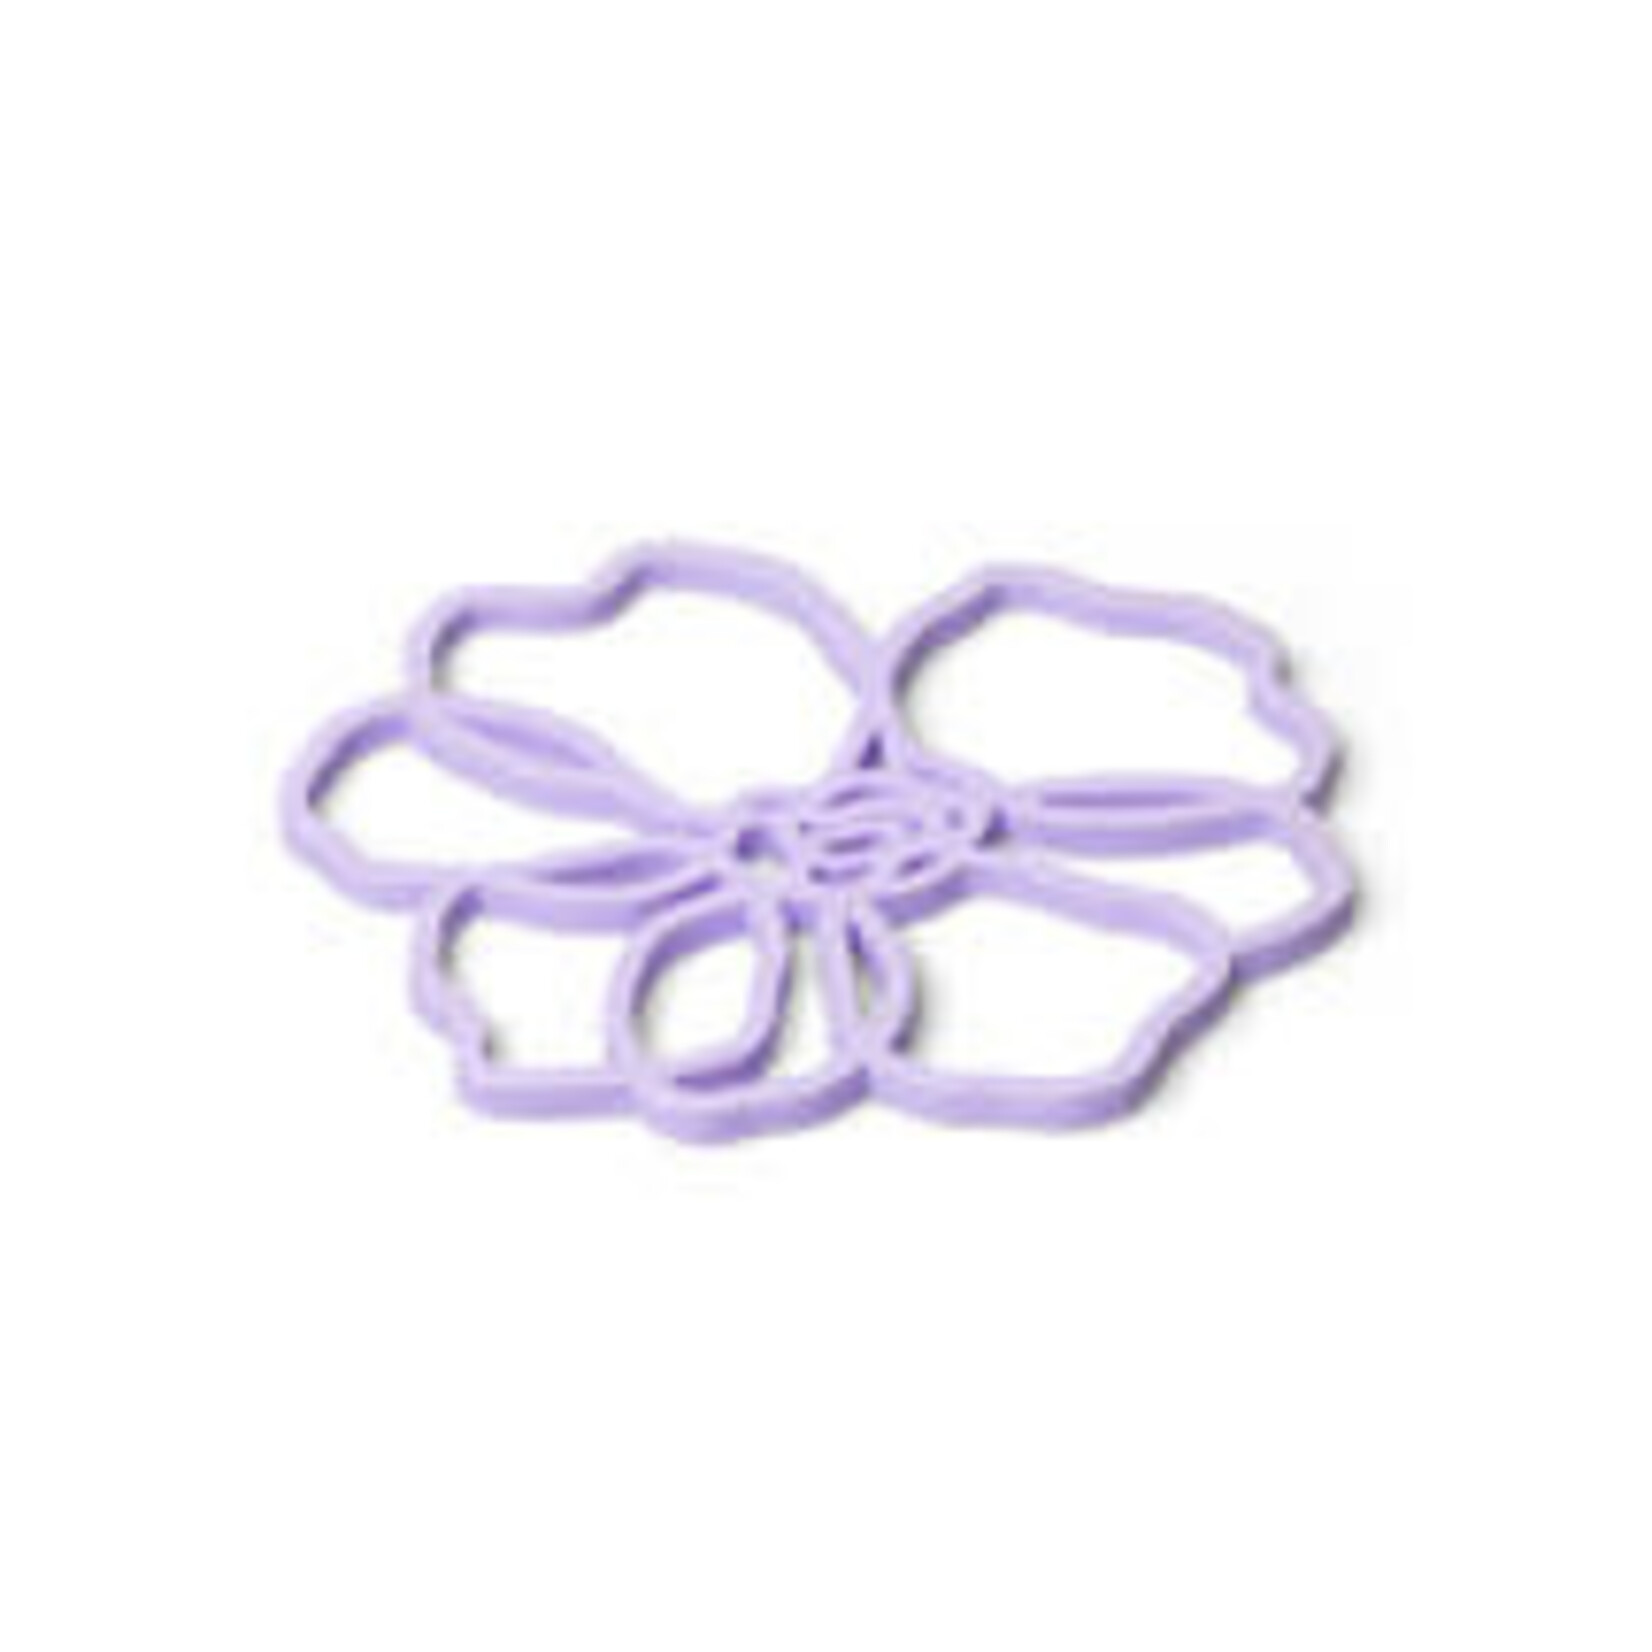 Tools2cook Flower Anemone Lilac pannenonderzetter Tools2cook Anemone Lilac onderzetter 2000507